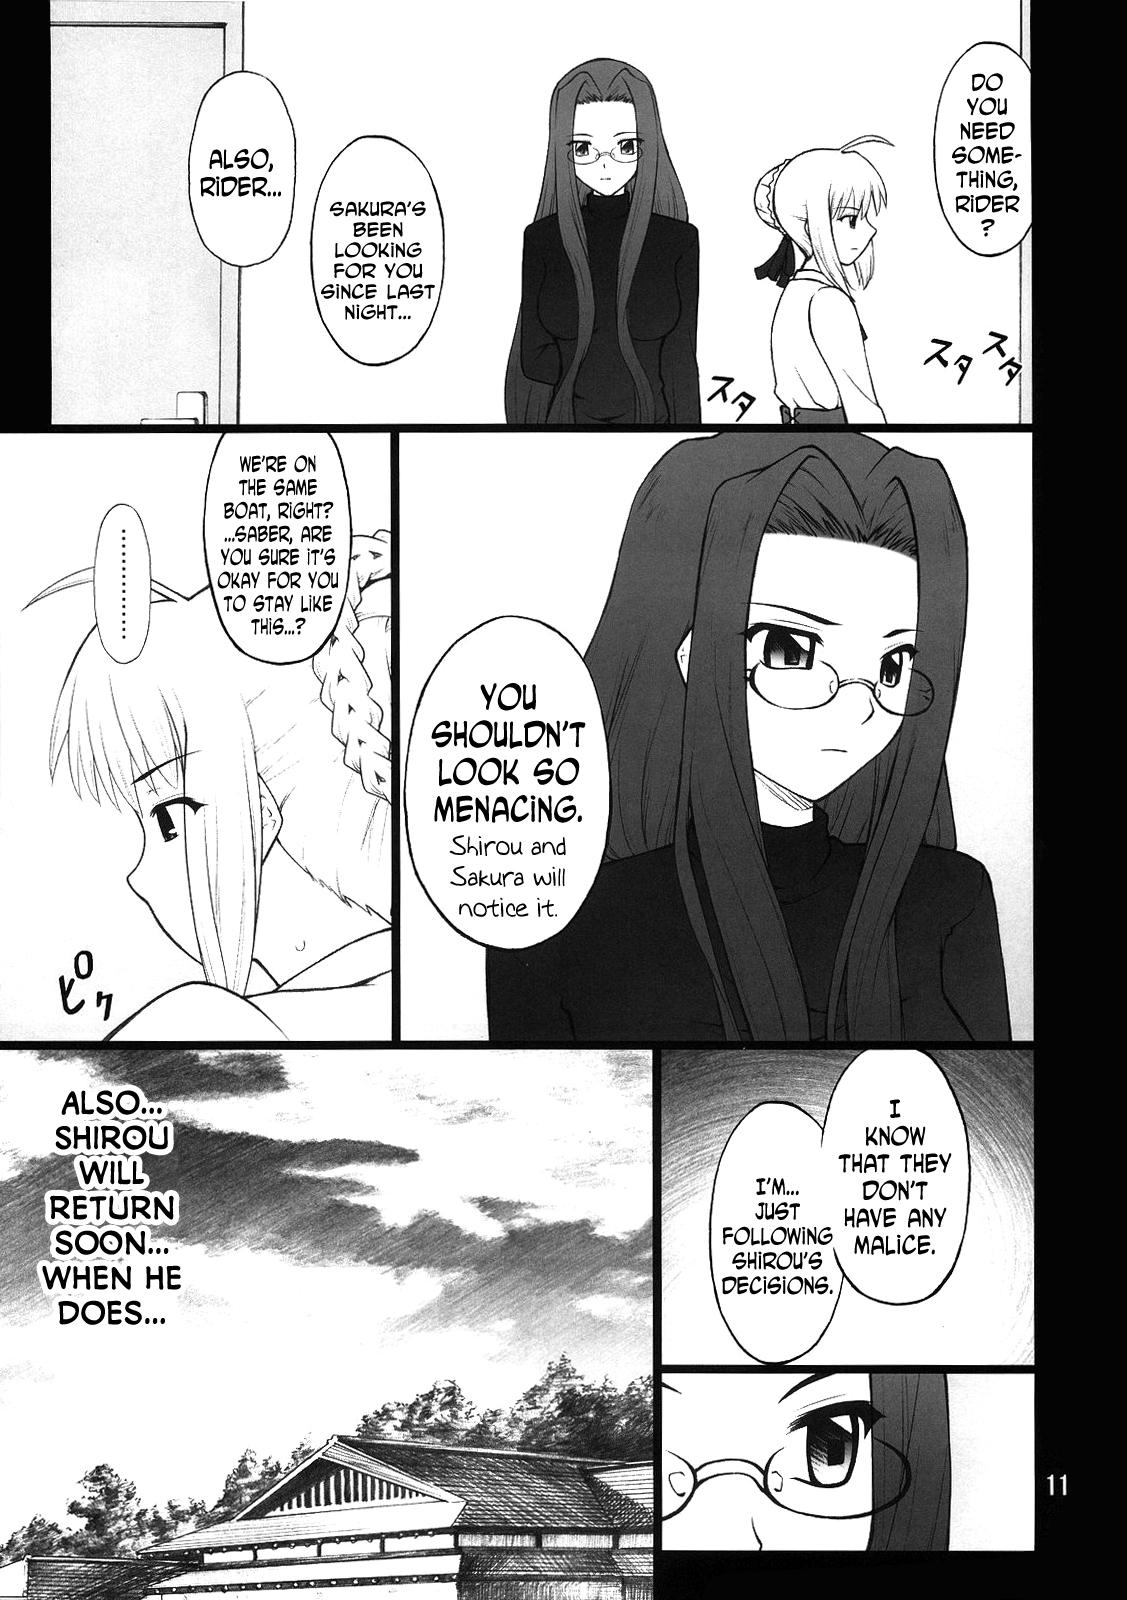 Boquete Grem-Rin 2 - Fate stay night Titties - Page 10